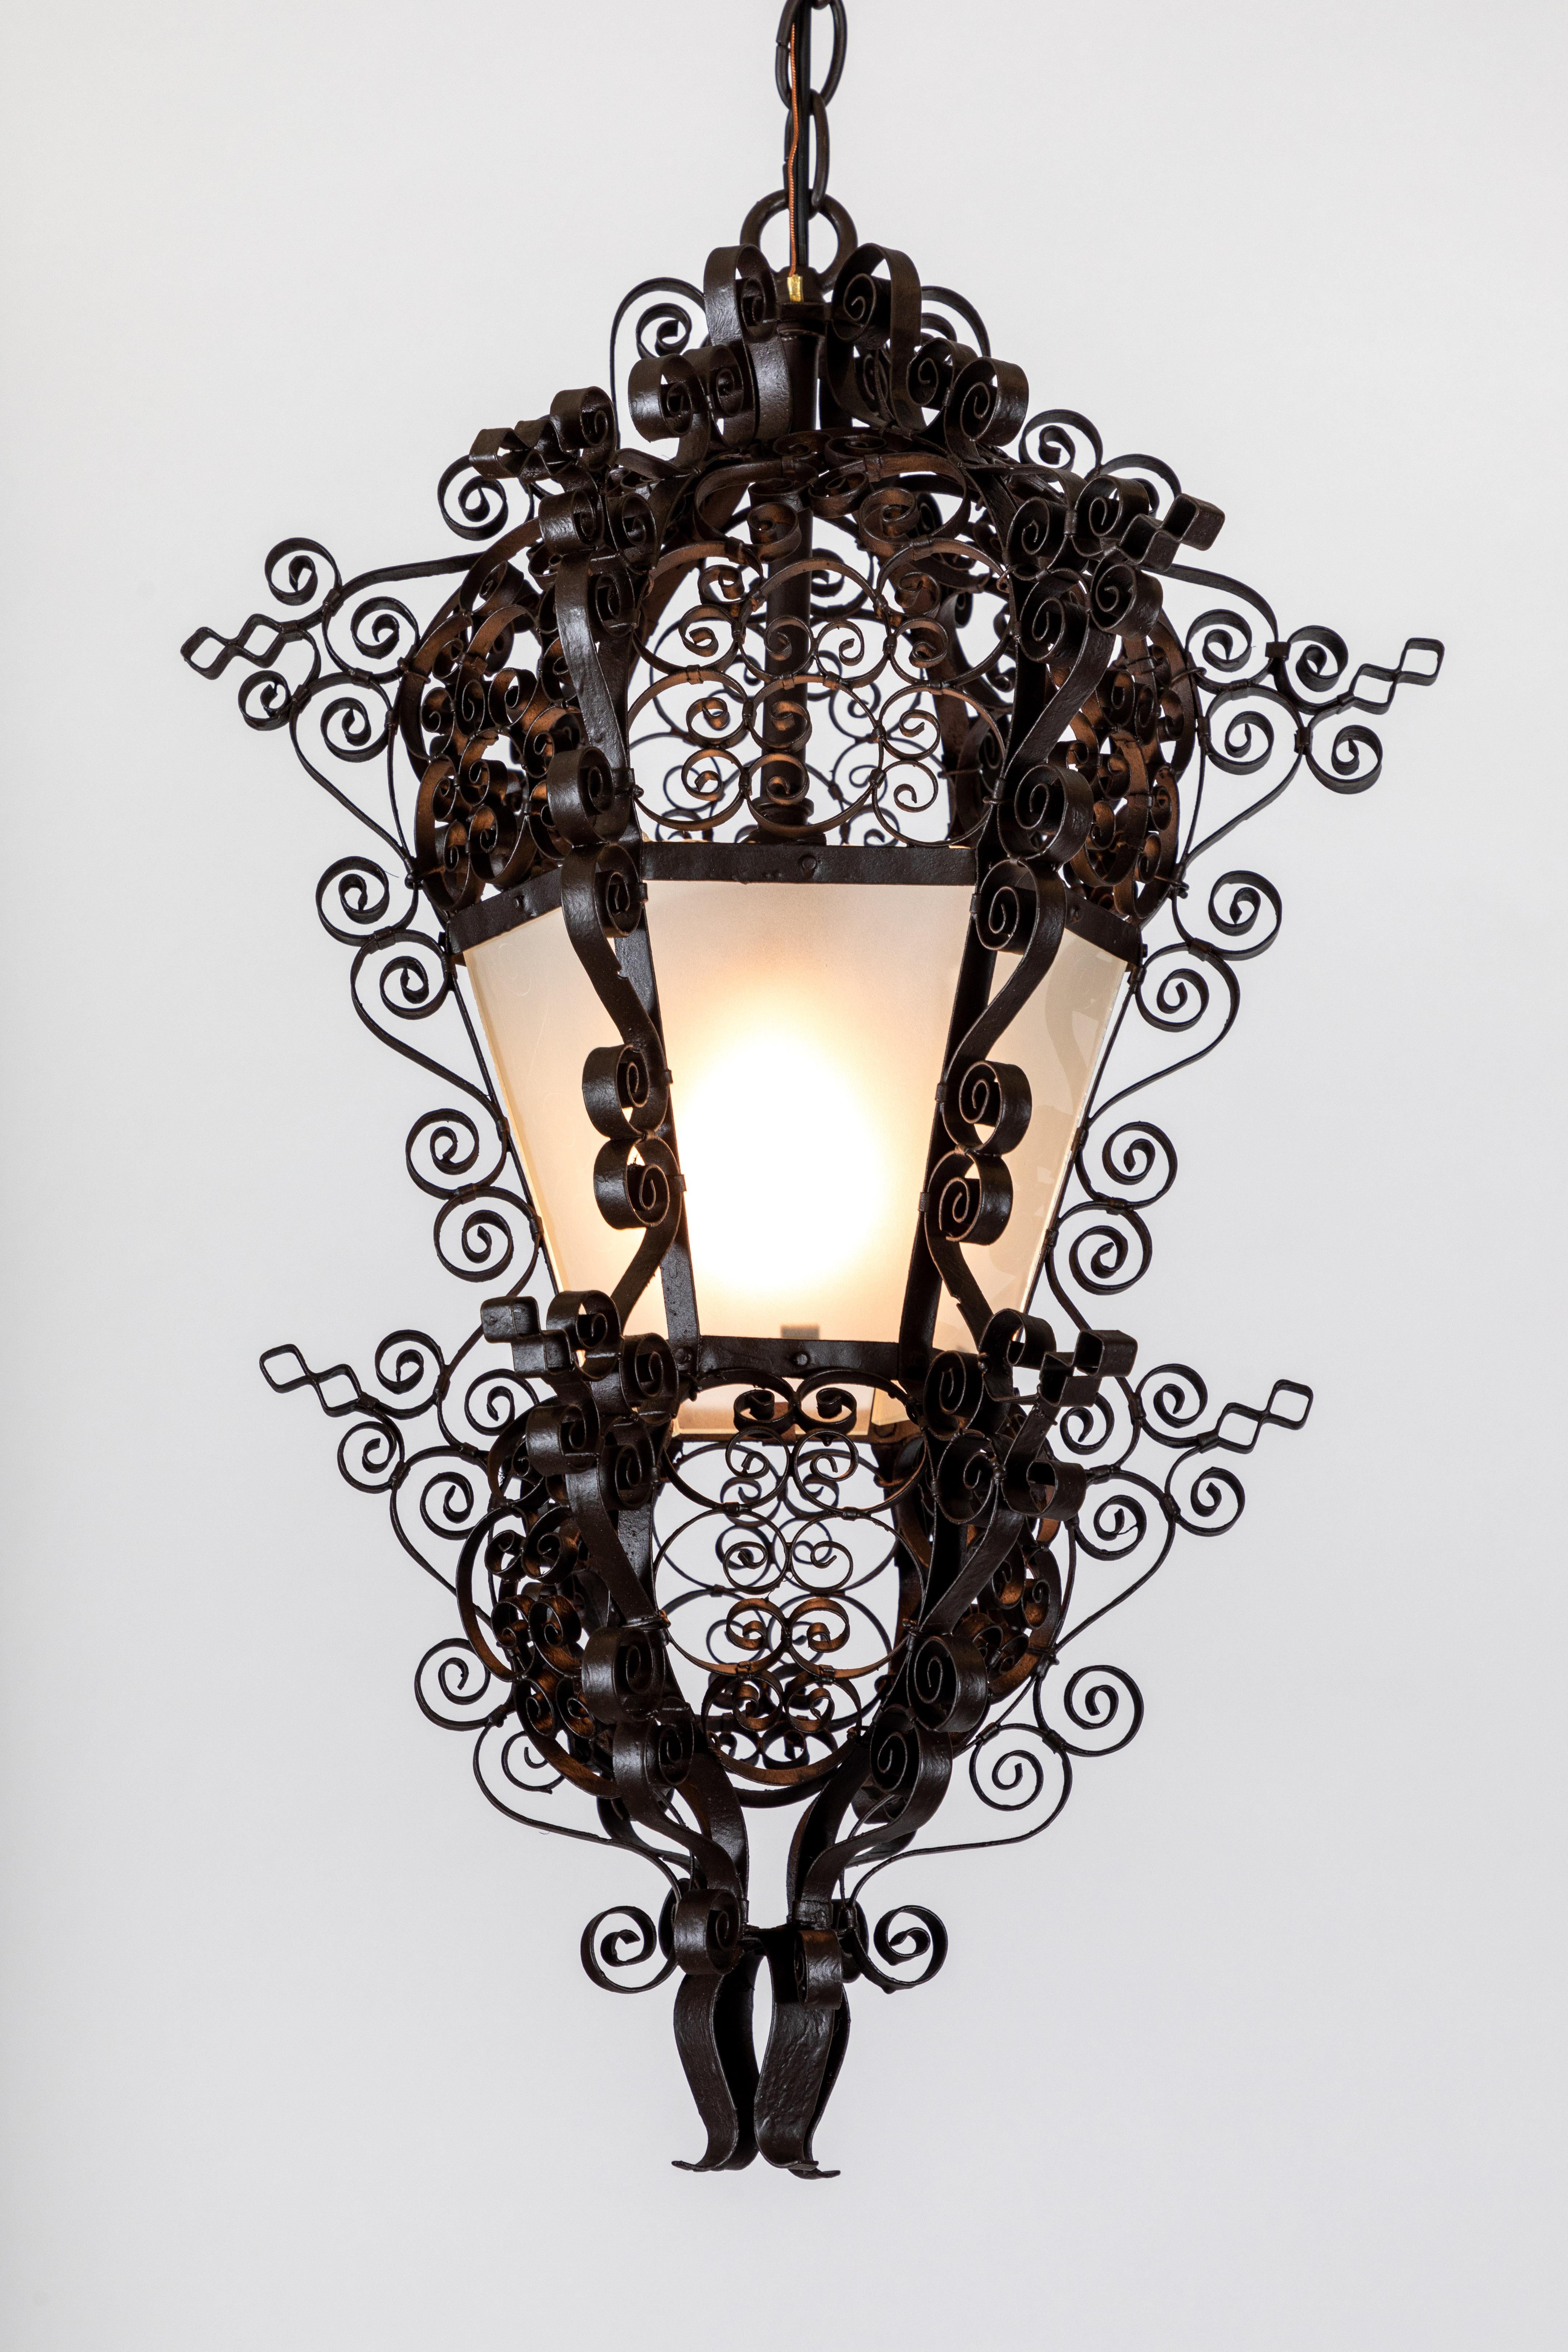 Frosted Antique French Iron Hanging Lantern Pendant Light